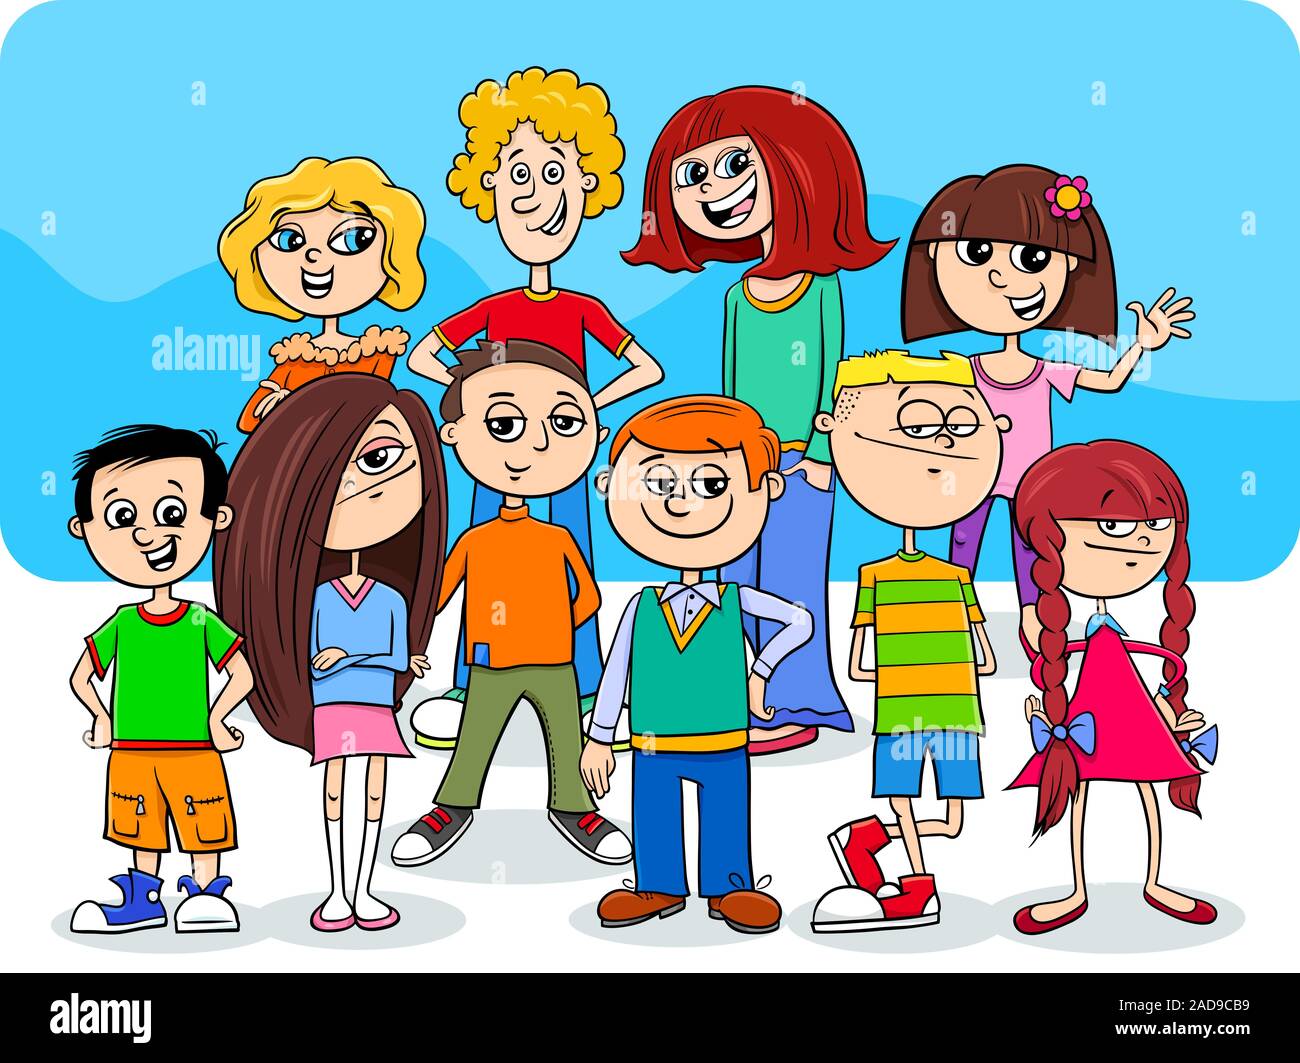 children and teens cartoon characters group Stock Photo - Alamy